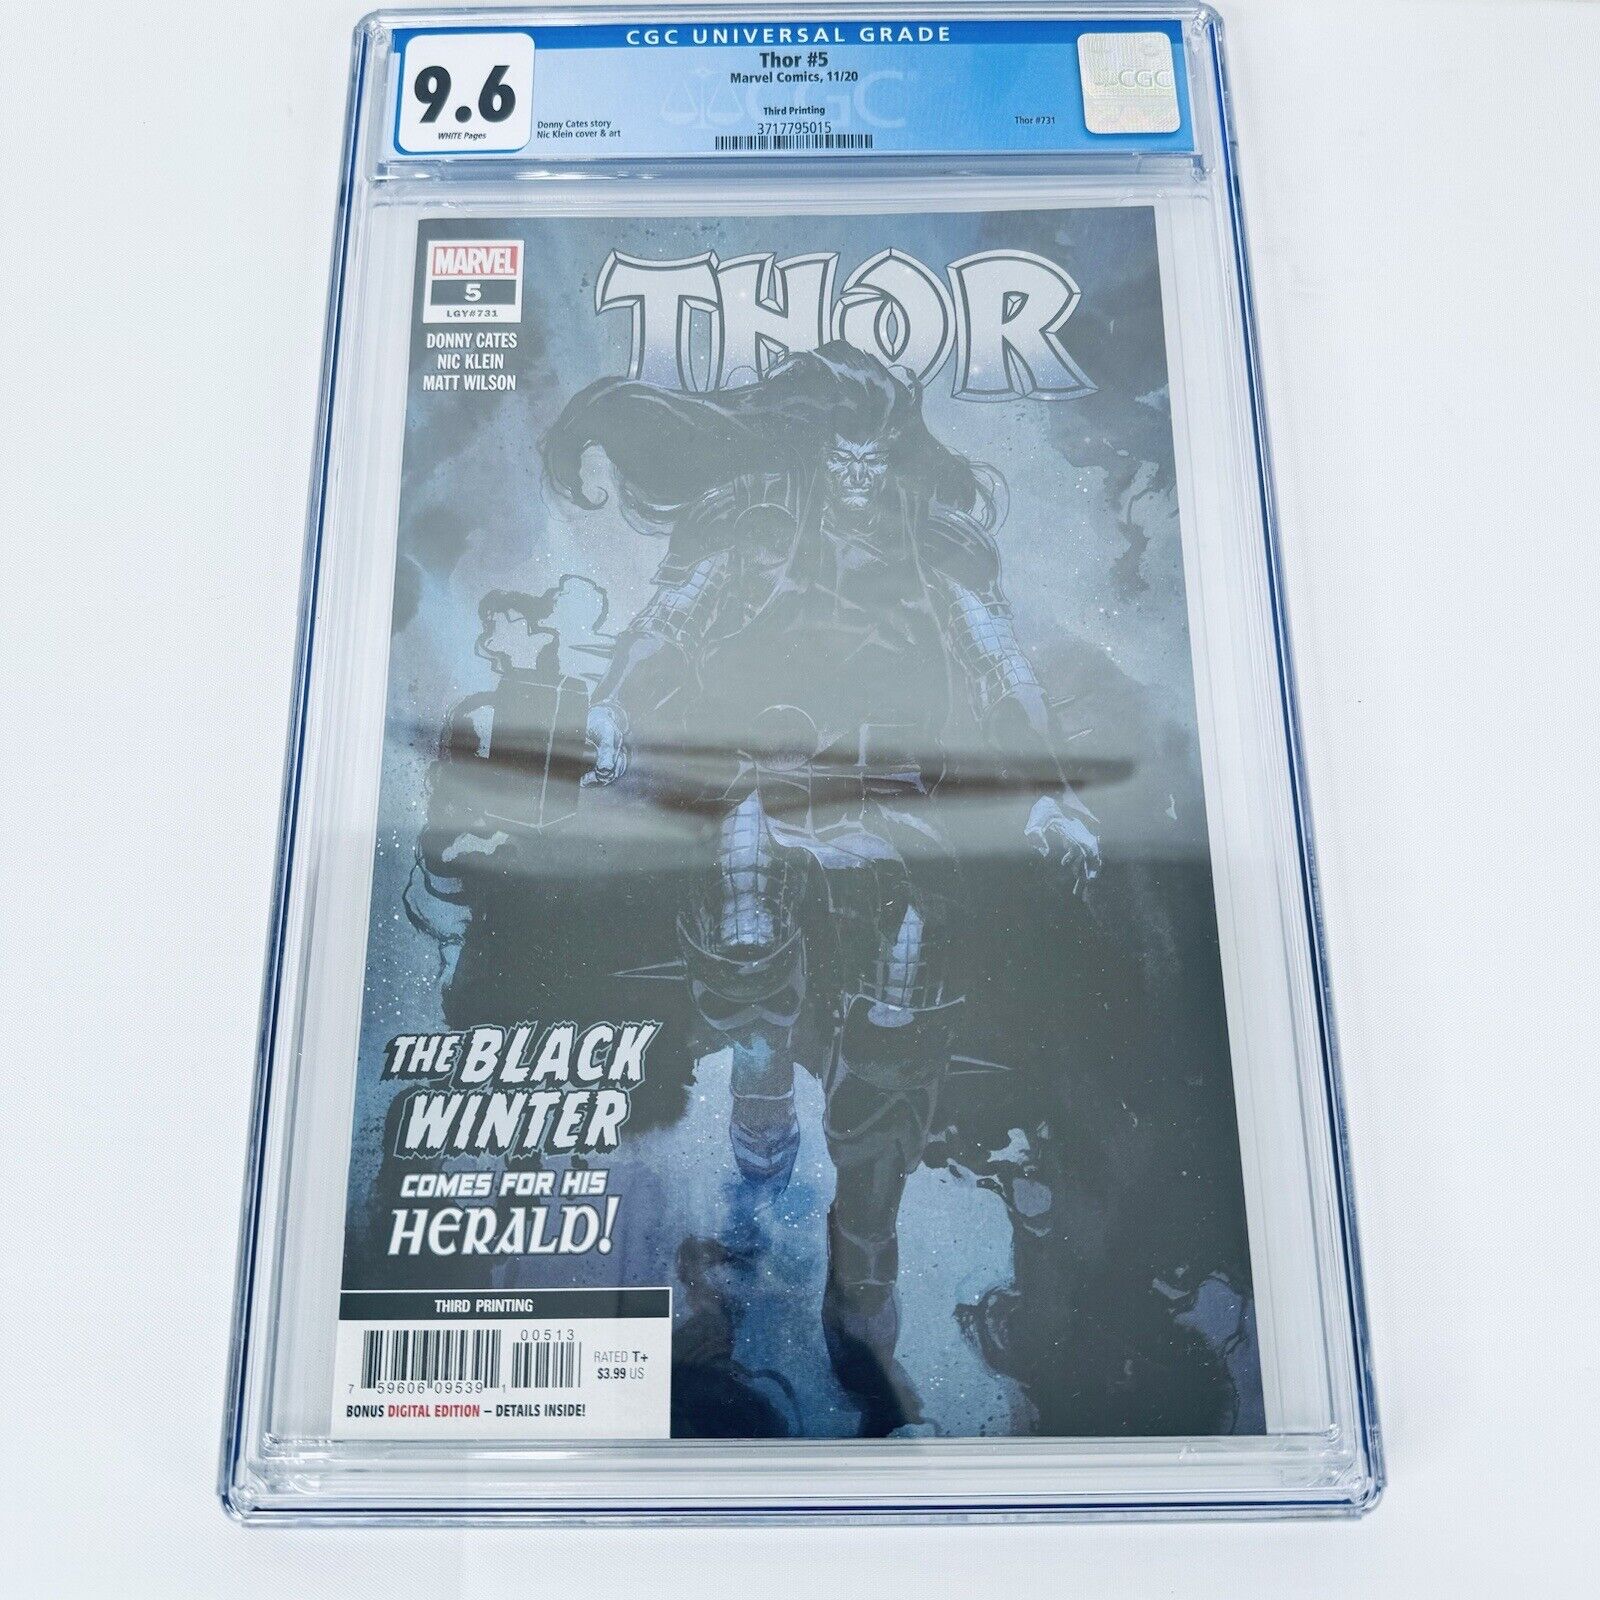 Thor #5 3rd Printing CGC 9.6 1st Full Appearance Black Winter Donny Cates